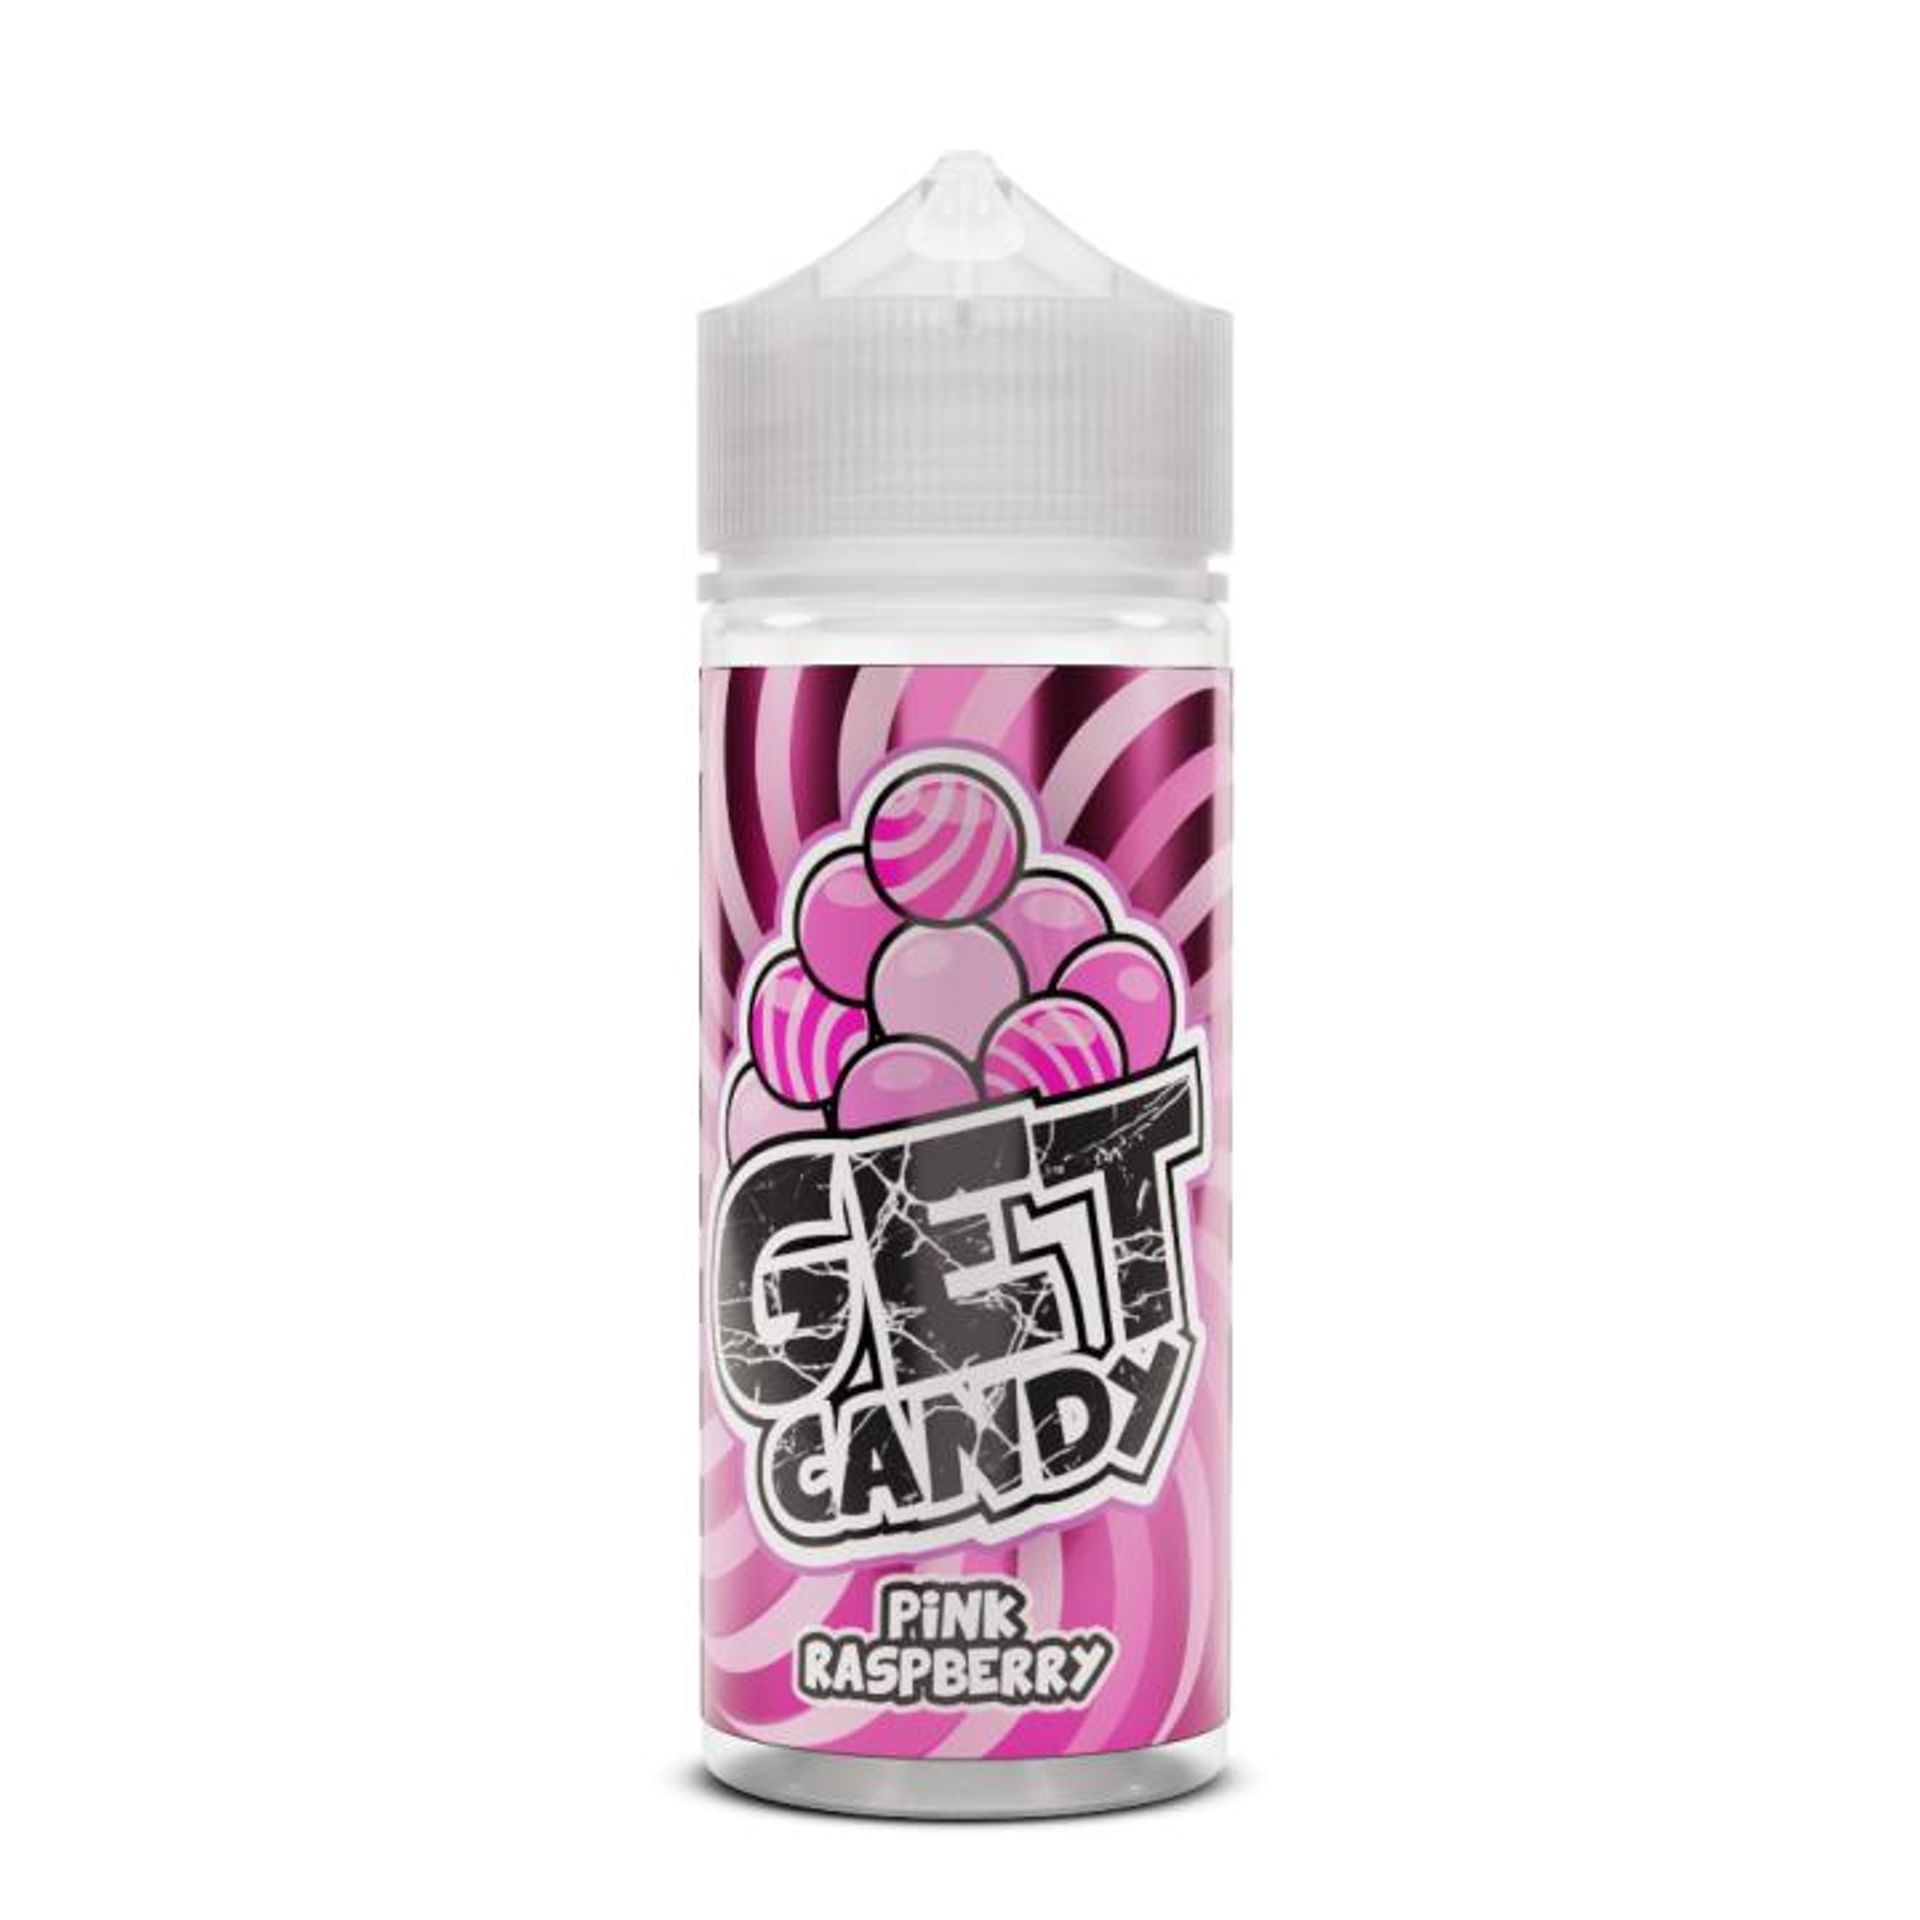 Image of Pink Raspberry by Get